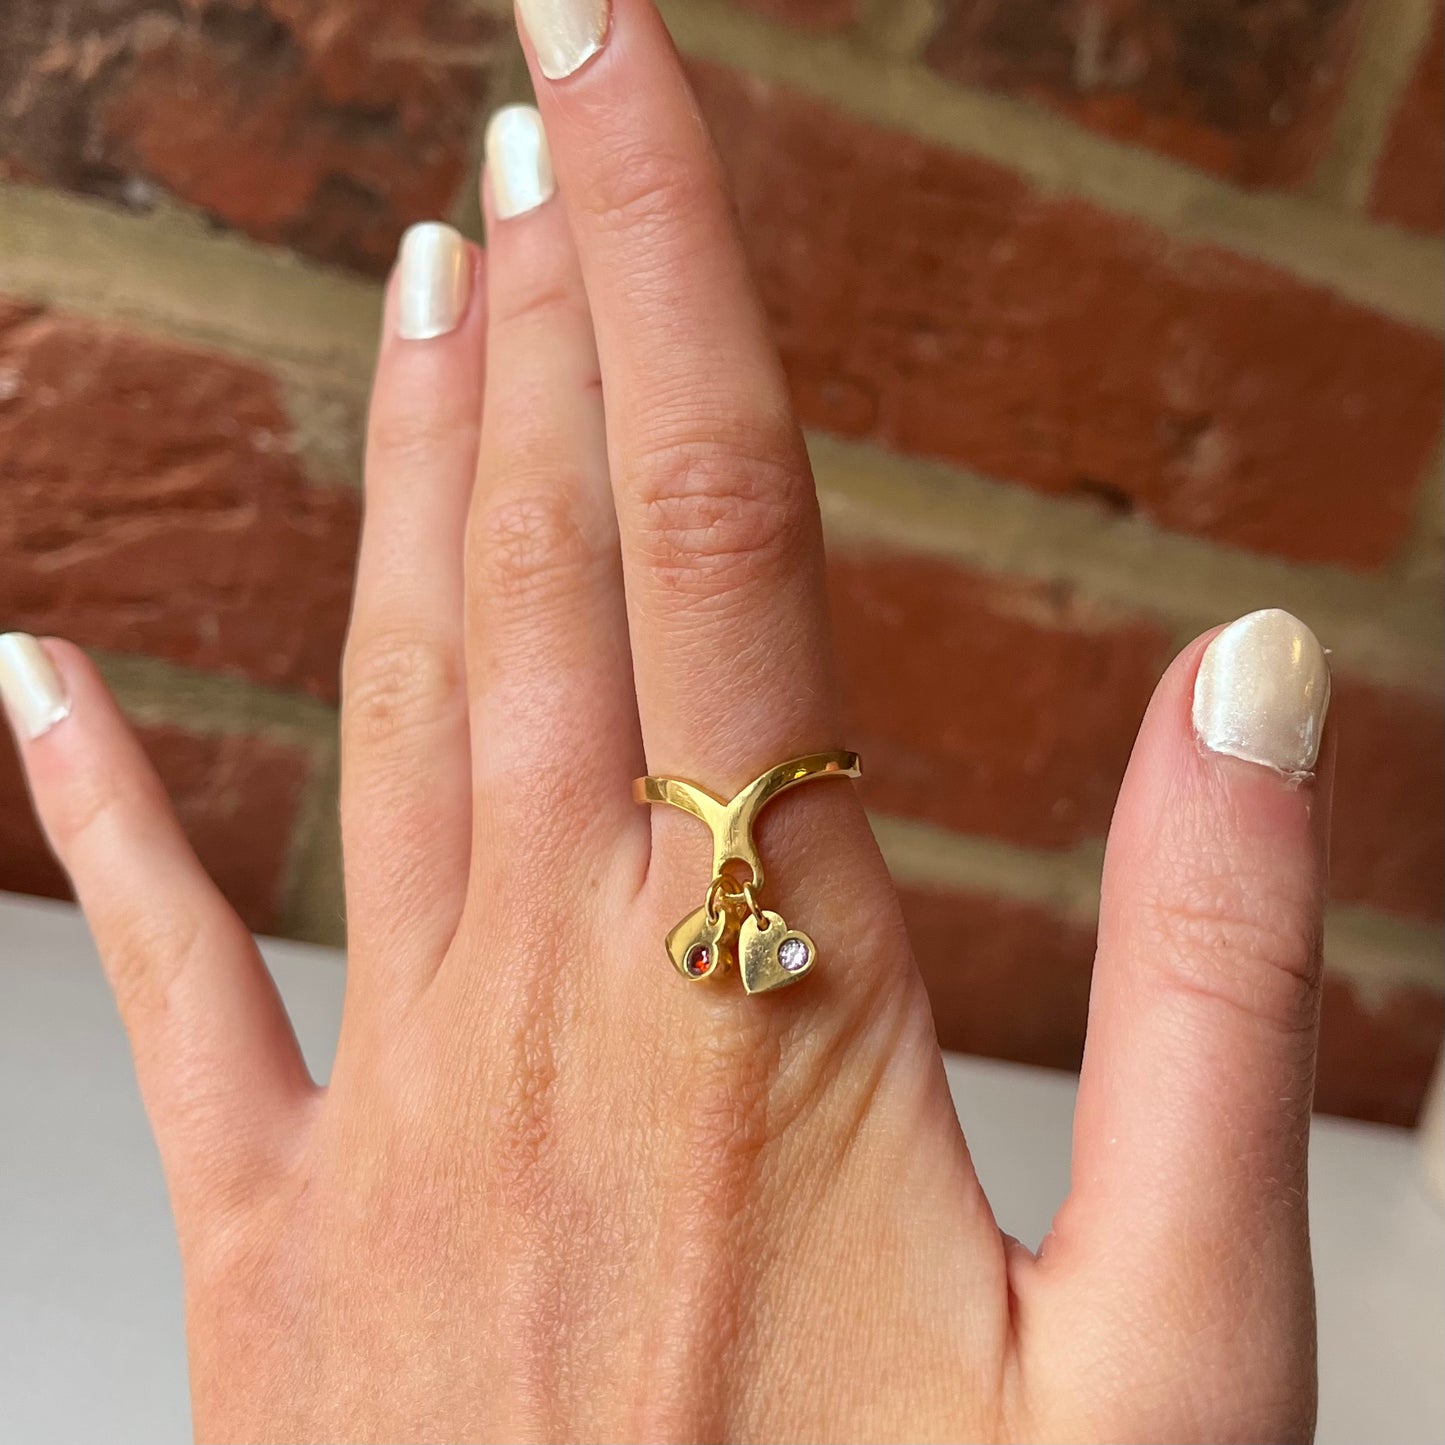 ‘Together Forever’ ring in Gold